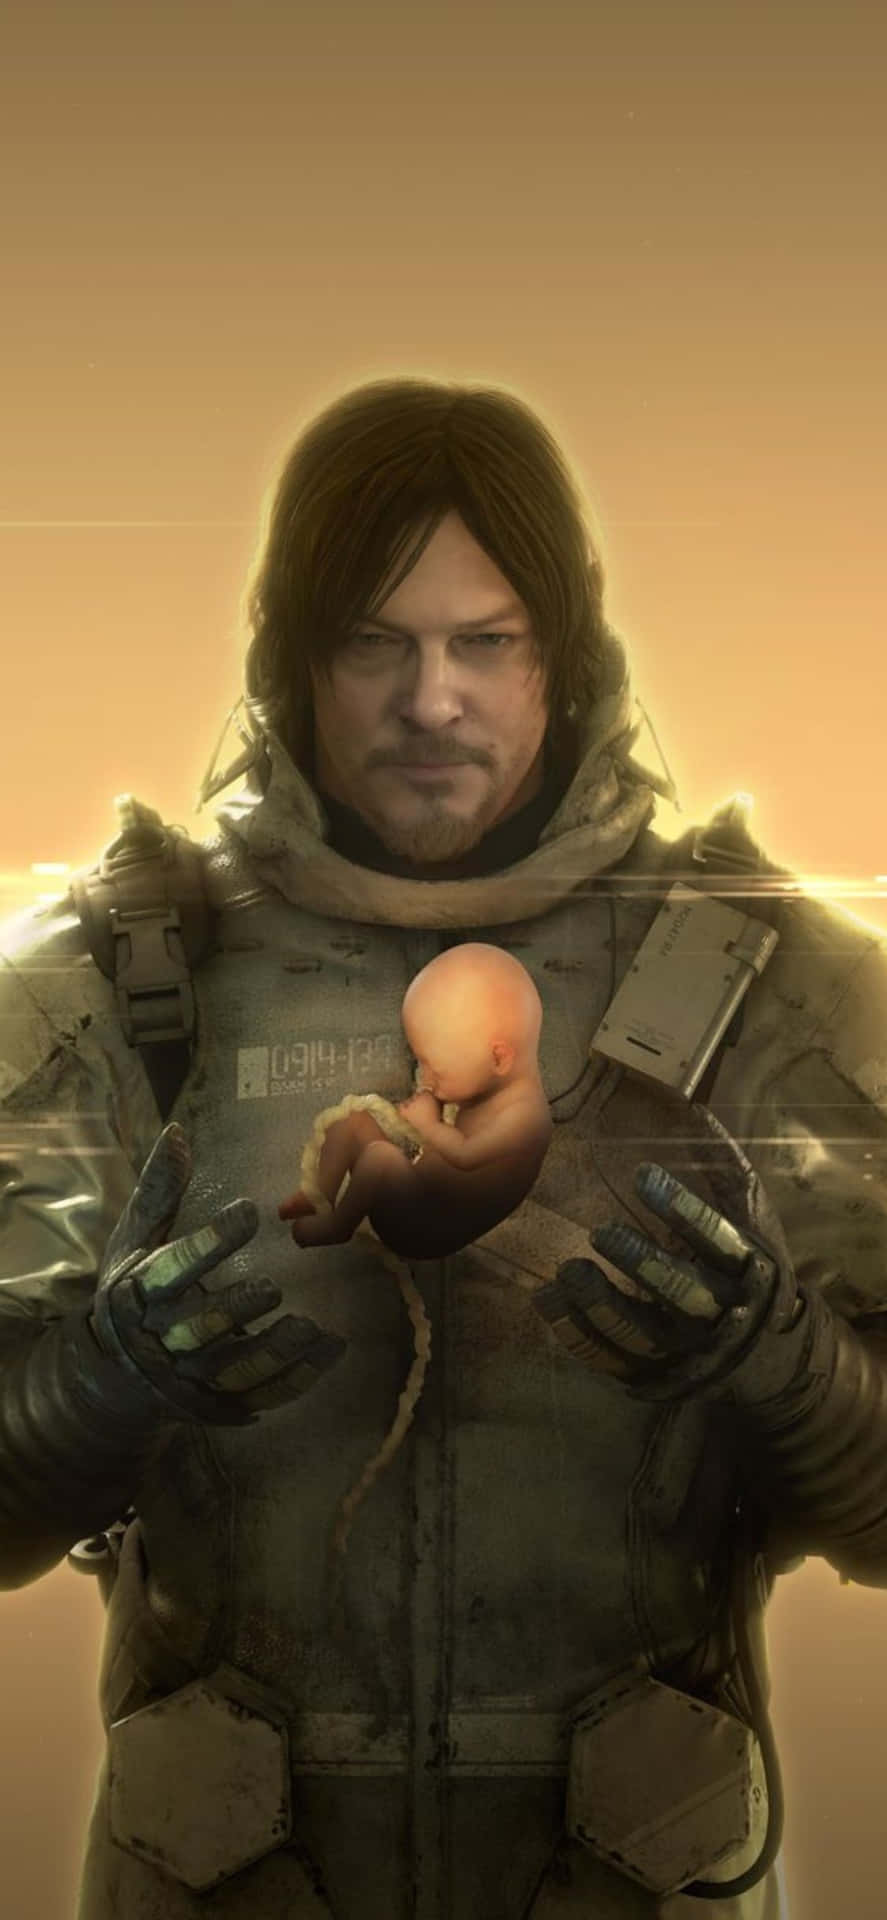 Protect yourself with the Iphone X and play Death Stranding